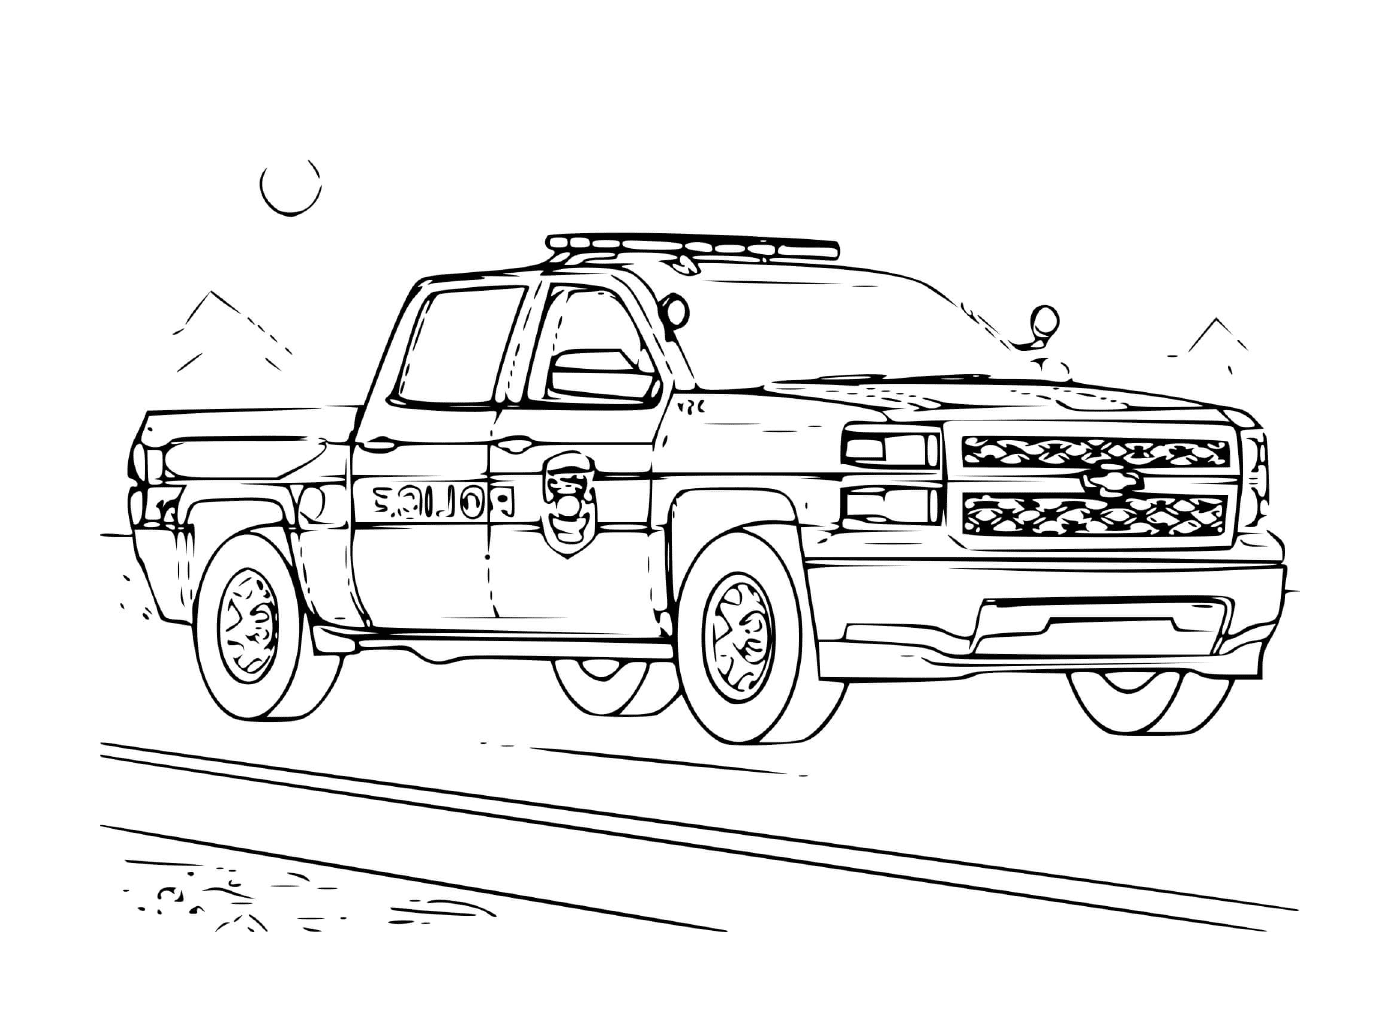  Off-road police vehicle 